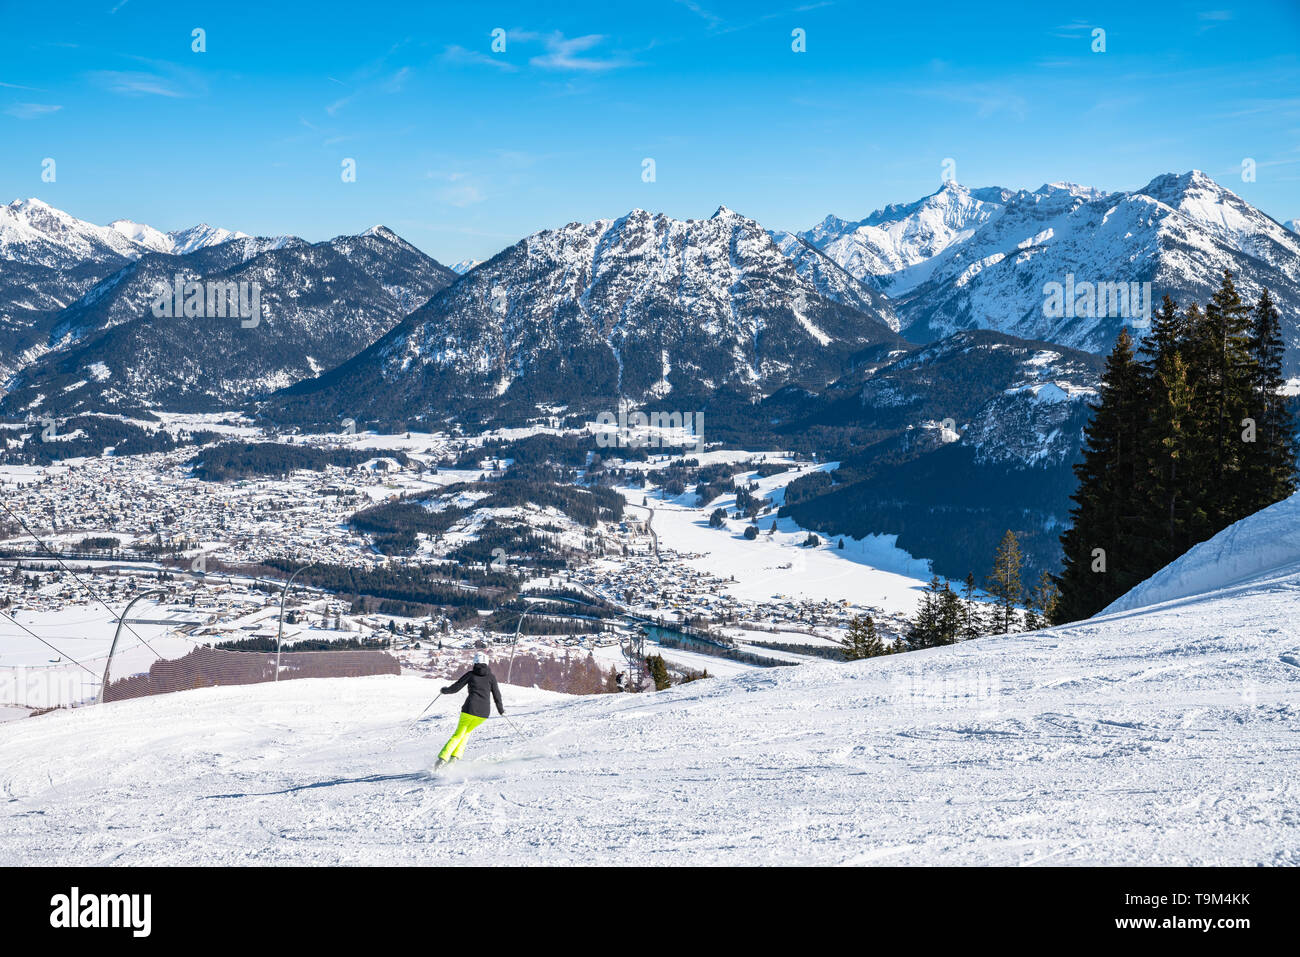 Panorama view of  snow covered Austrian Alps in winterabove the small town Reutte, with ski slope and skiing people in foreground, Tyrol, Austria Stock Photo